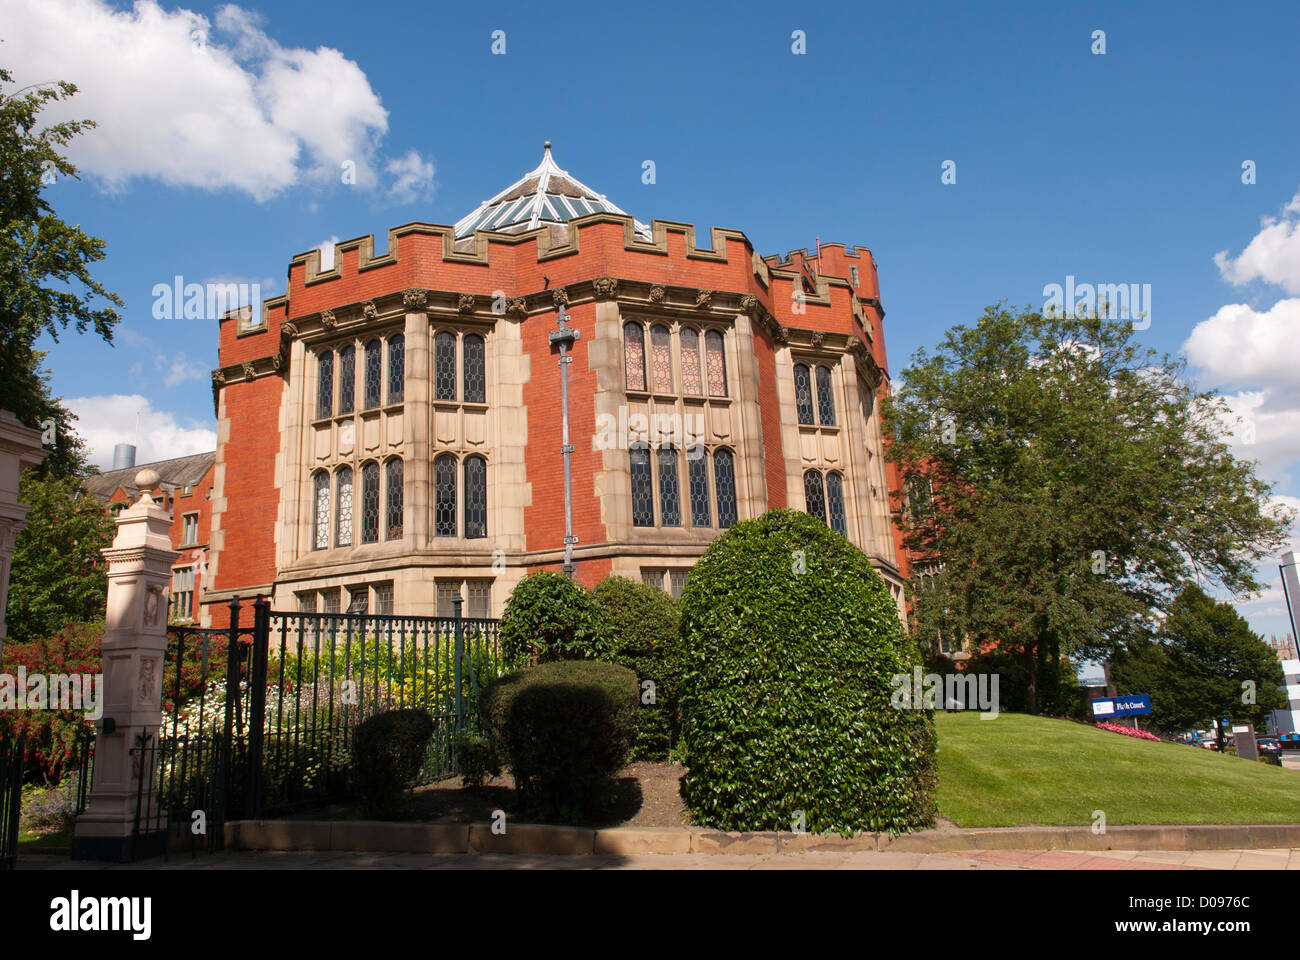 Firth Court, The University of Sheffield, Sheffield, South Yorkshire, England. Stock Photo